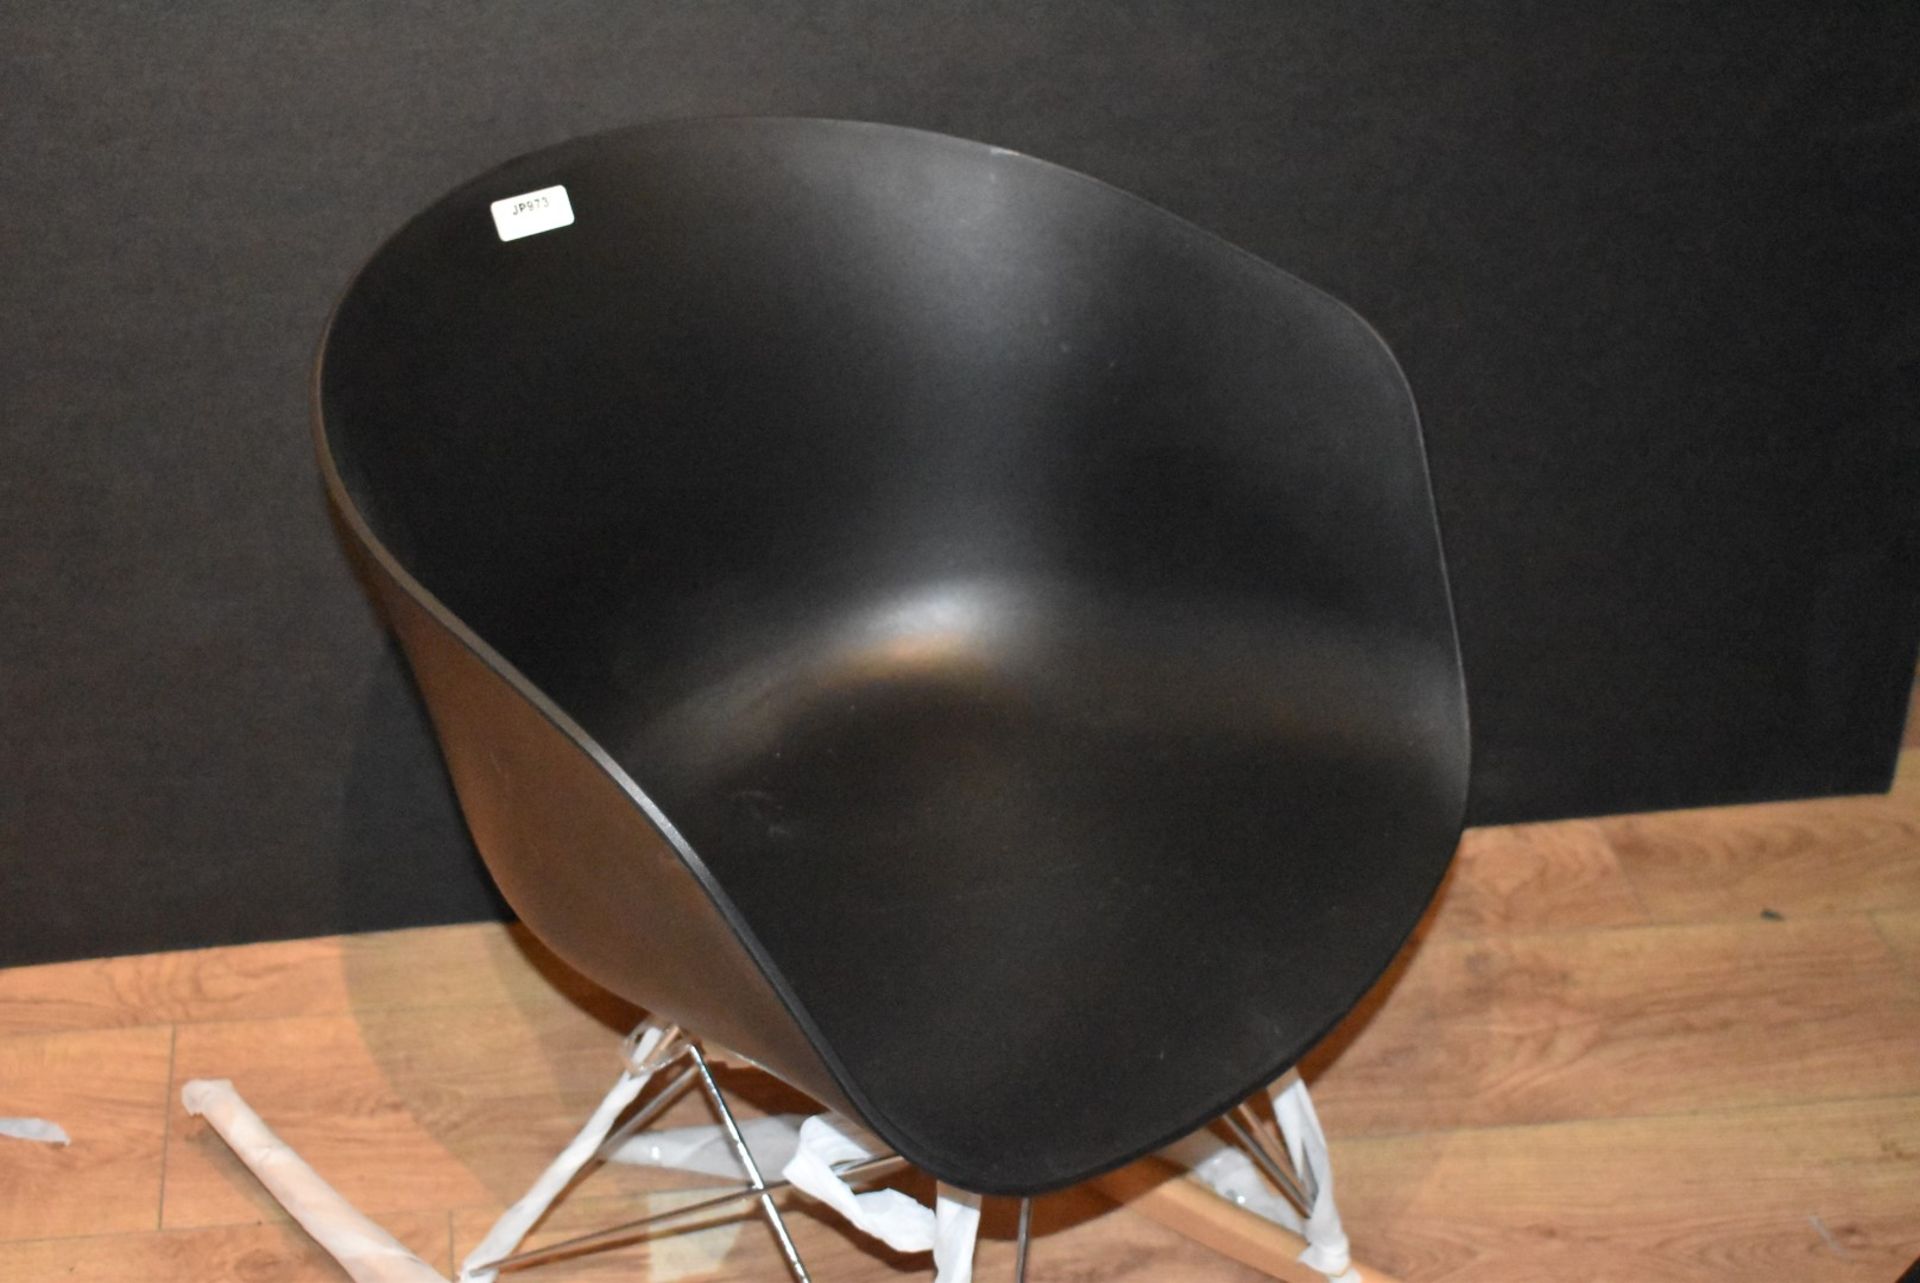 1 x Designer Inspired Rocking Tub Chair - Black ABS Plastic With Beech Rocking Base - New and Unused - Image 3 of 3